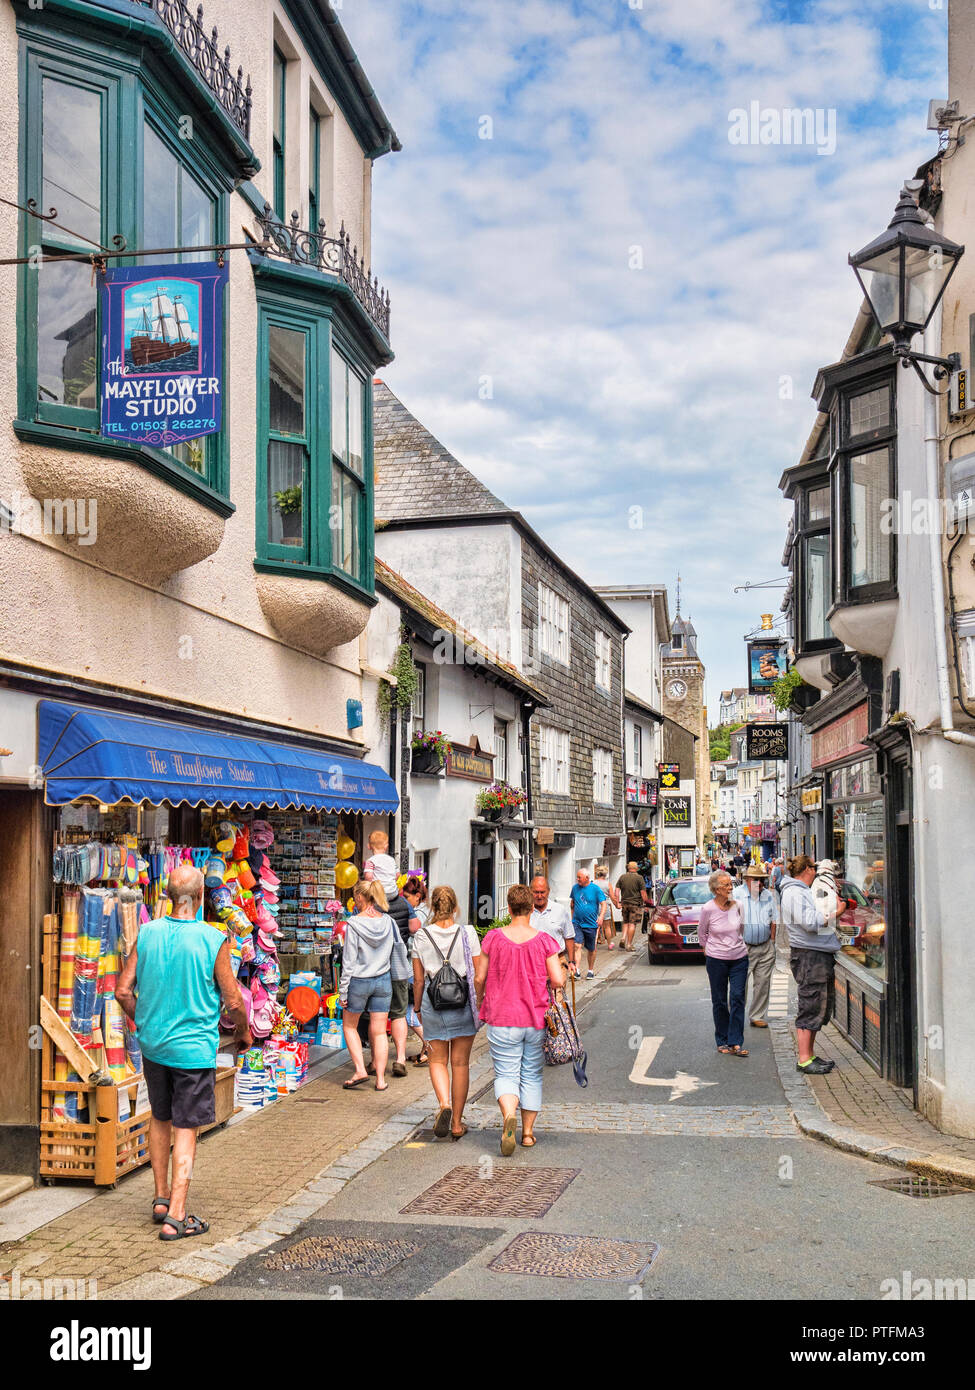 6 June 2018: Looe, Cornwall, UK - Shopping in Fore Street on a warm spring day. Stock Photo